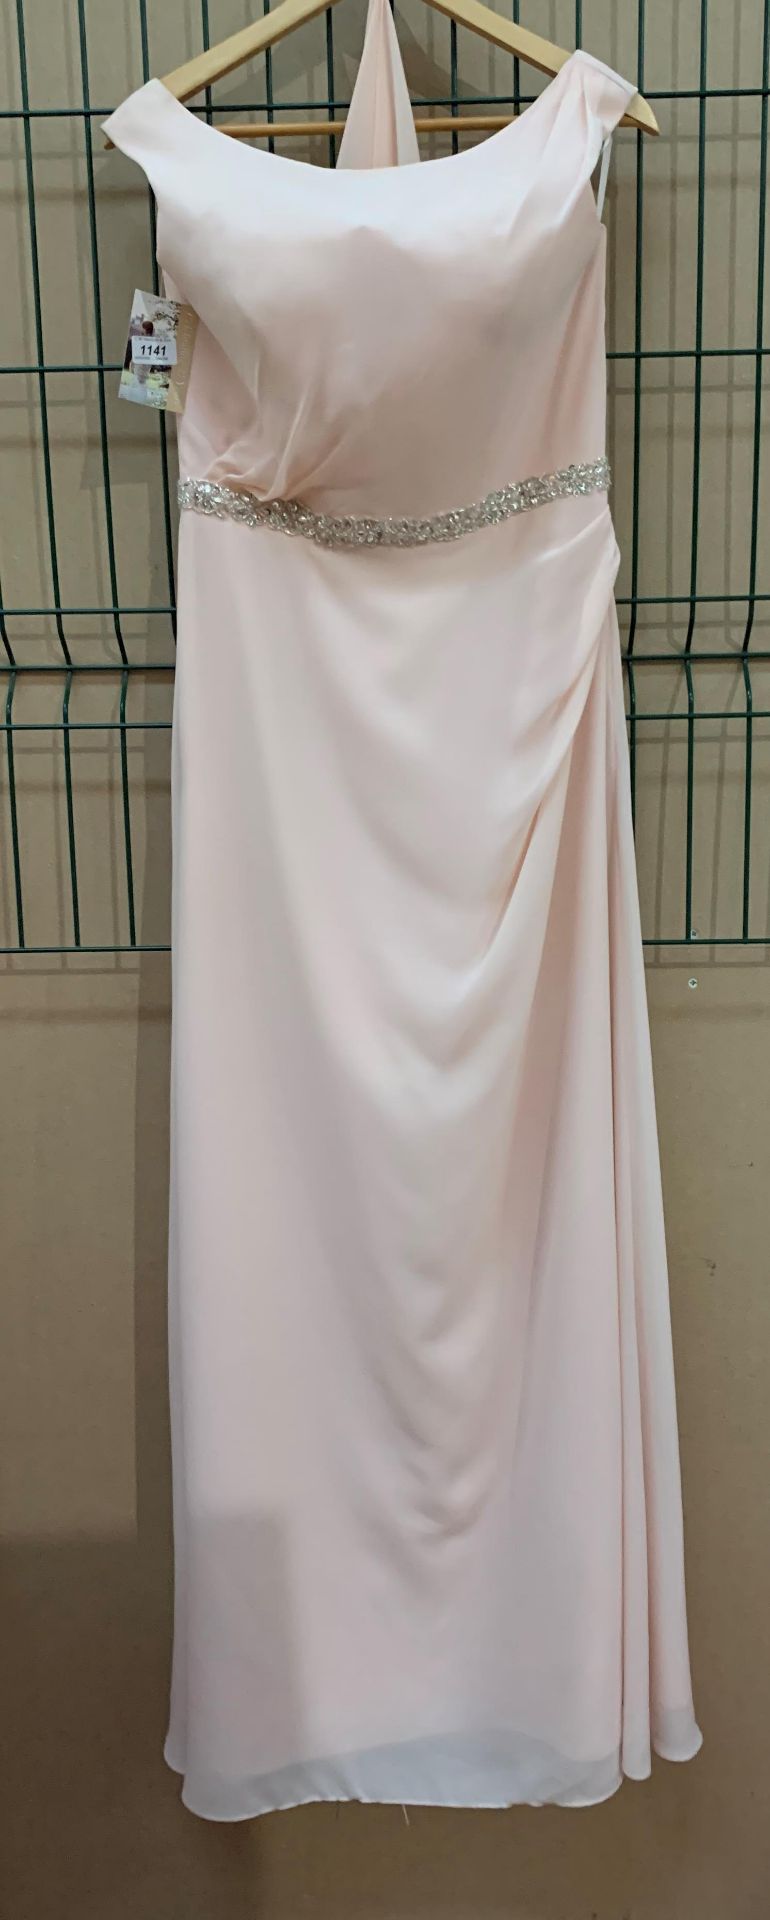 A bridesmaid/prom dress and stole by Serenade, Sigourney, blush, size 12,